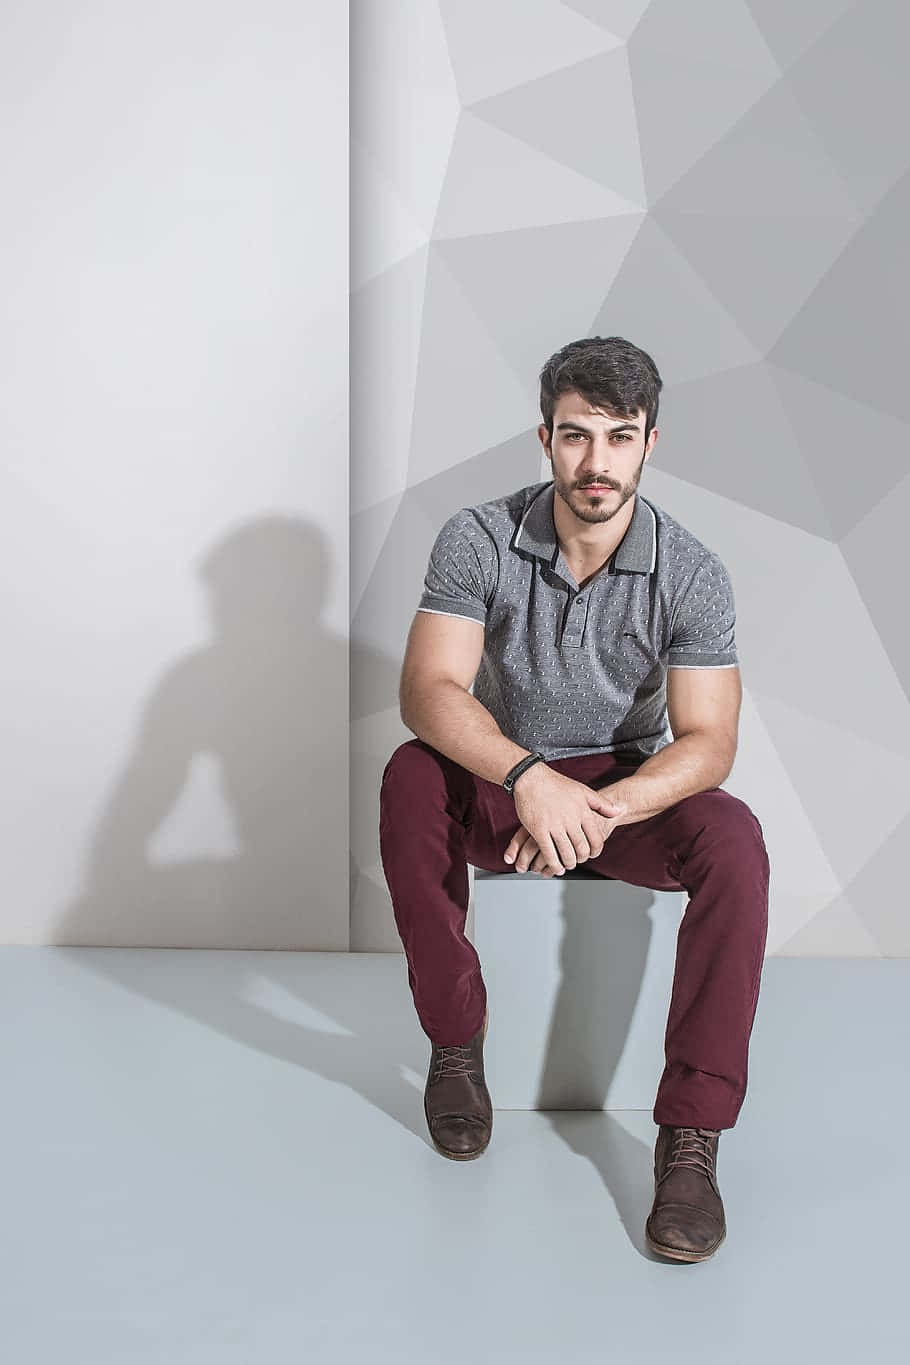 Confident Male Model Posing Against Abstract Gray Wall Wallpaper